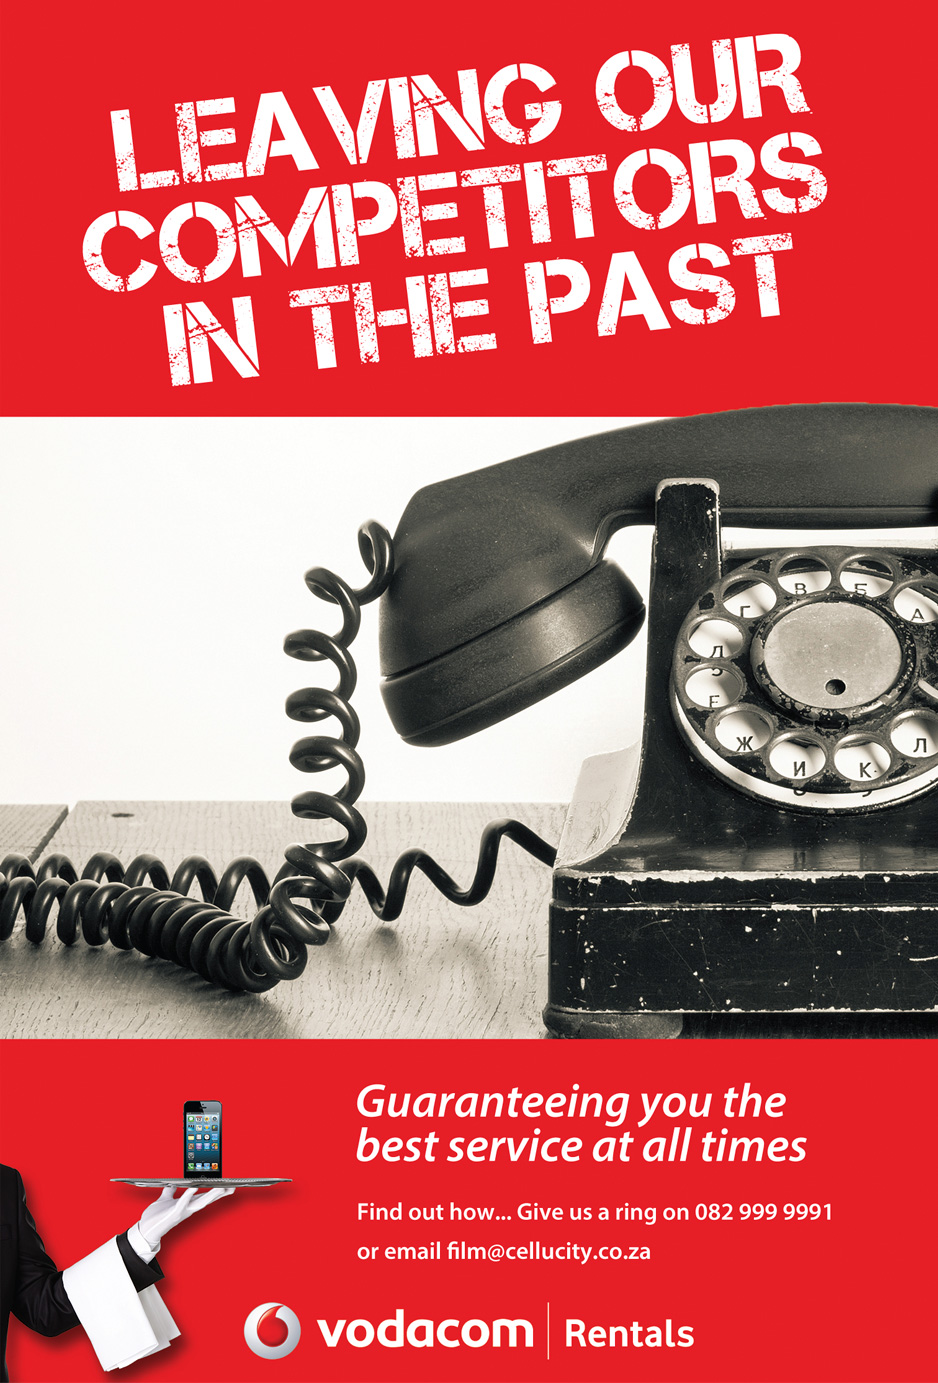 Vodacom Rentals - leaving our competitors in the past